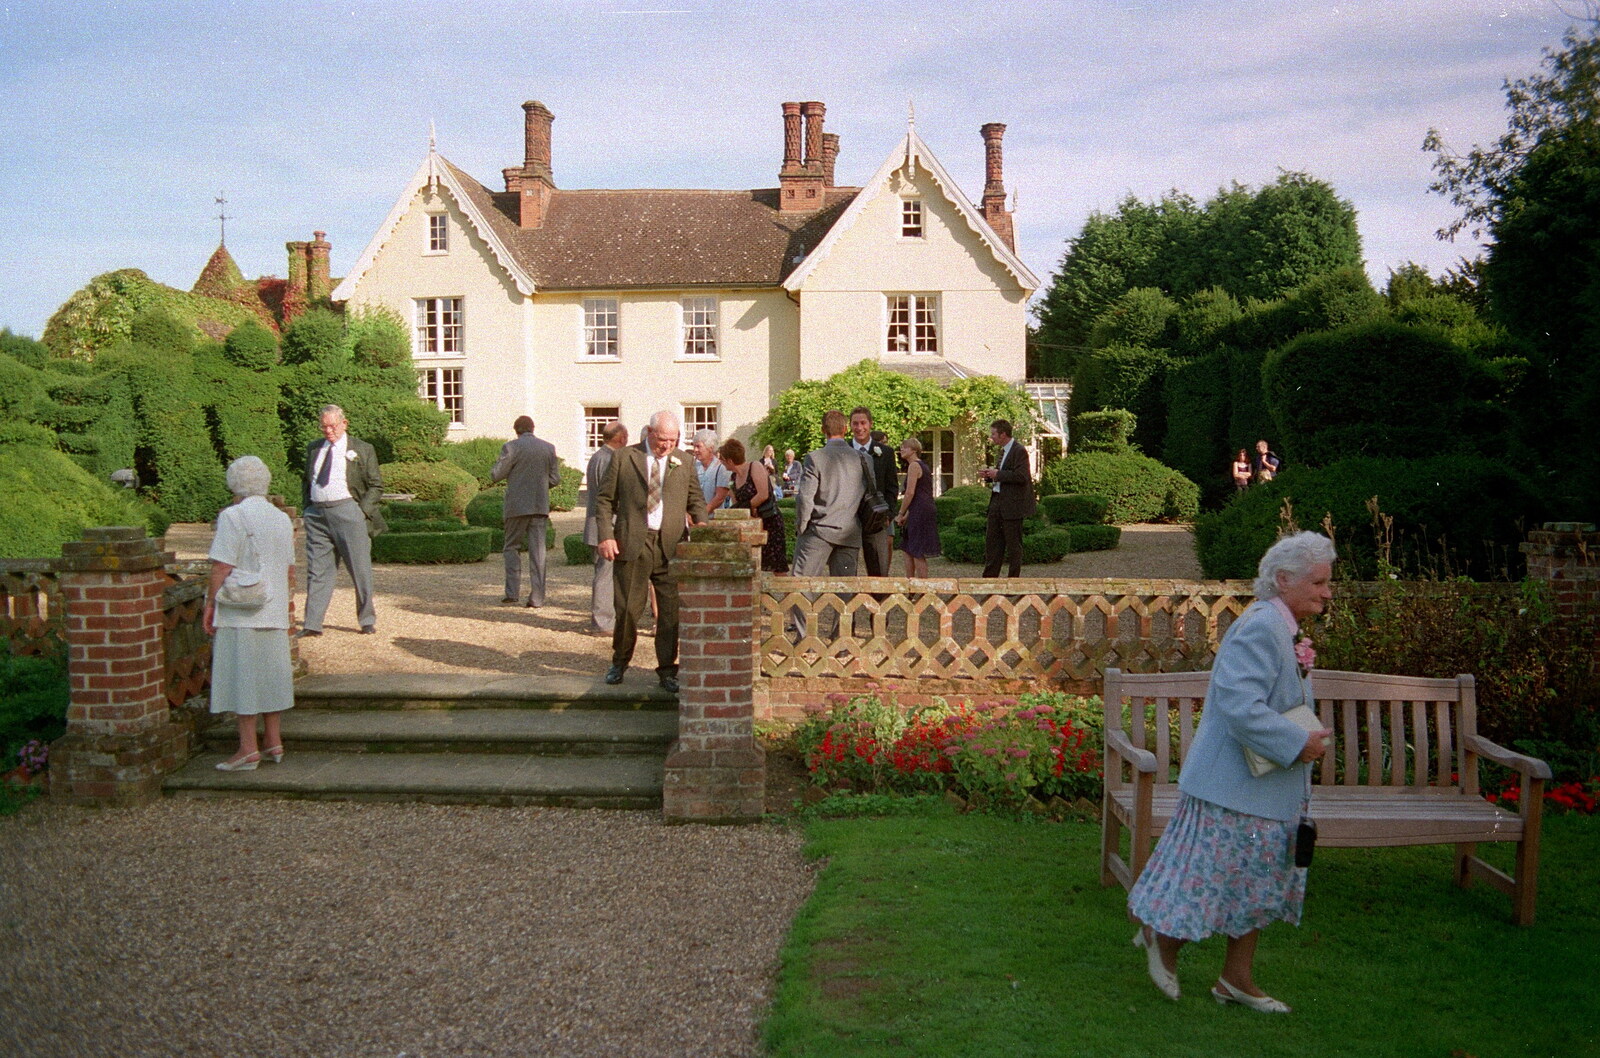 Guests roam around outside the Oaksmere from Helen and Neil's Wedding, The Oaksmere, Brome, Suffolk - 4th August 2000